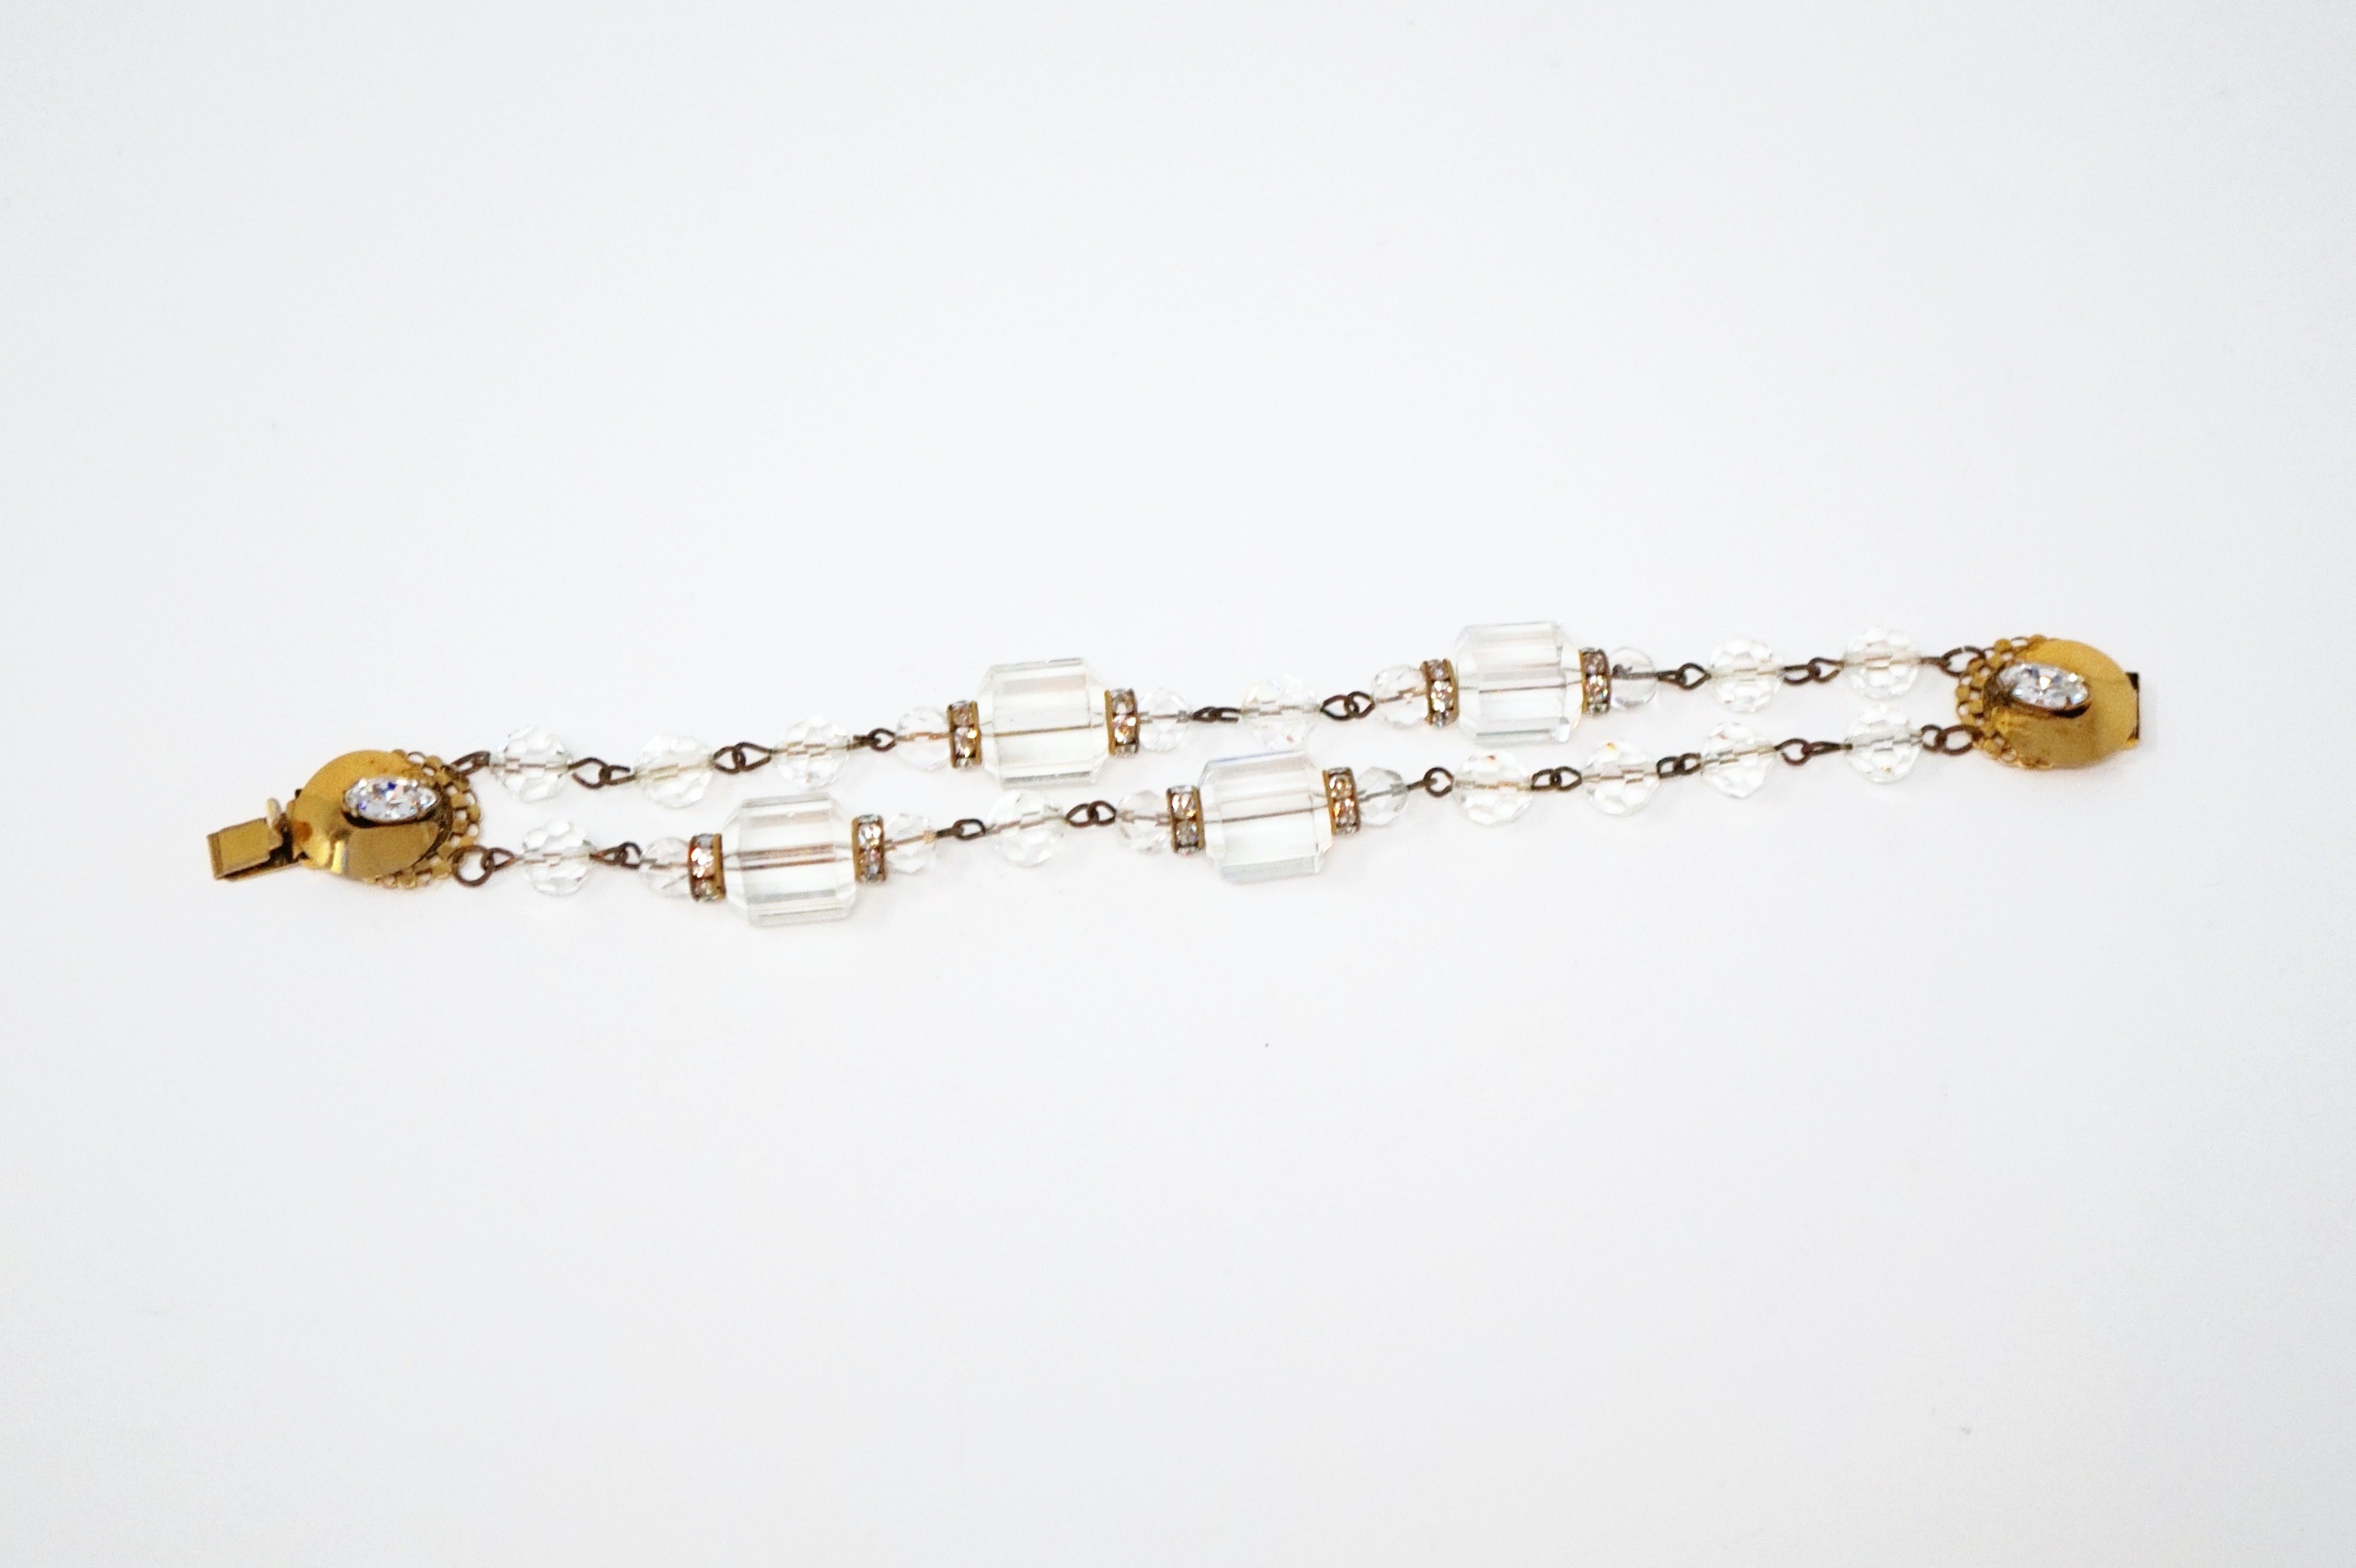 Modern Faceted Crystal Beaded Double Strand Bracelet by Freirich, Signed, circa 1960s